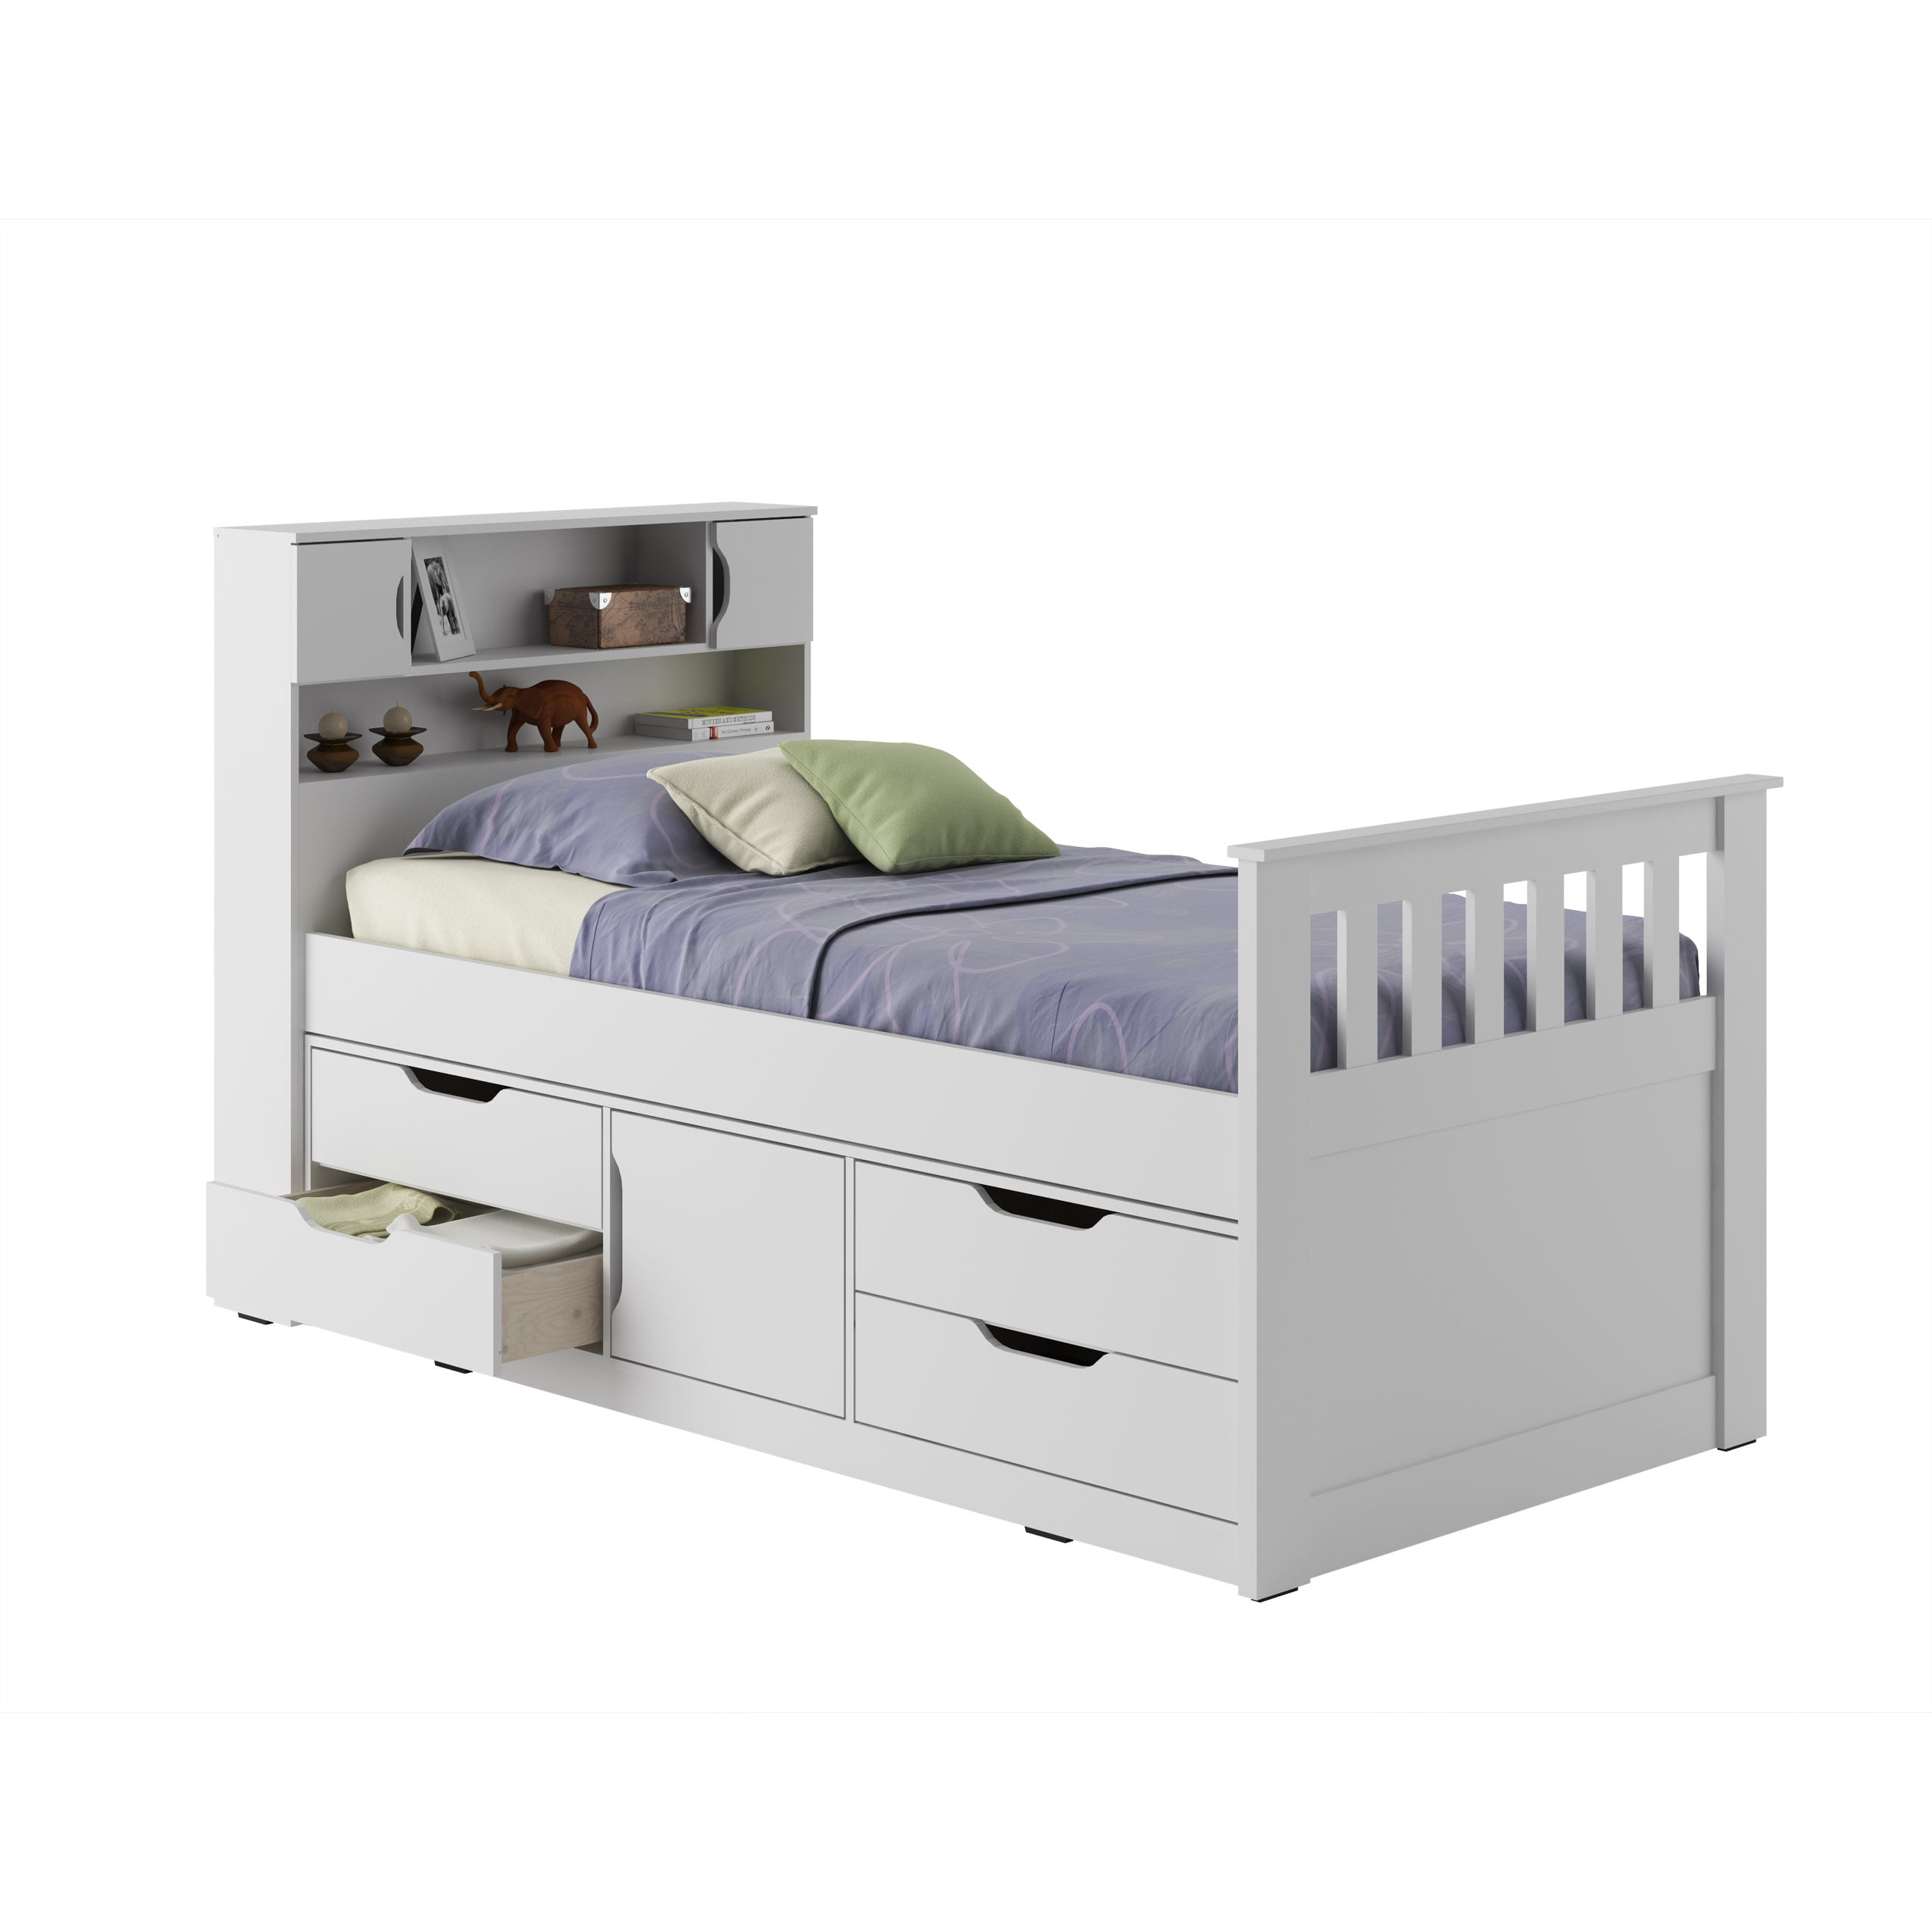 Corliving Madison Twin Single Captain S, Solid Wood Captain’s Bed Twin